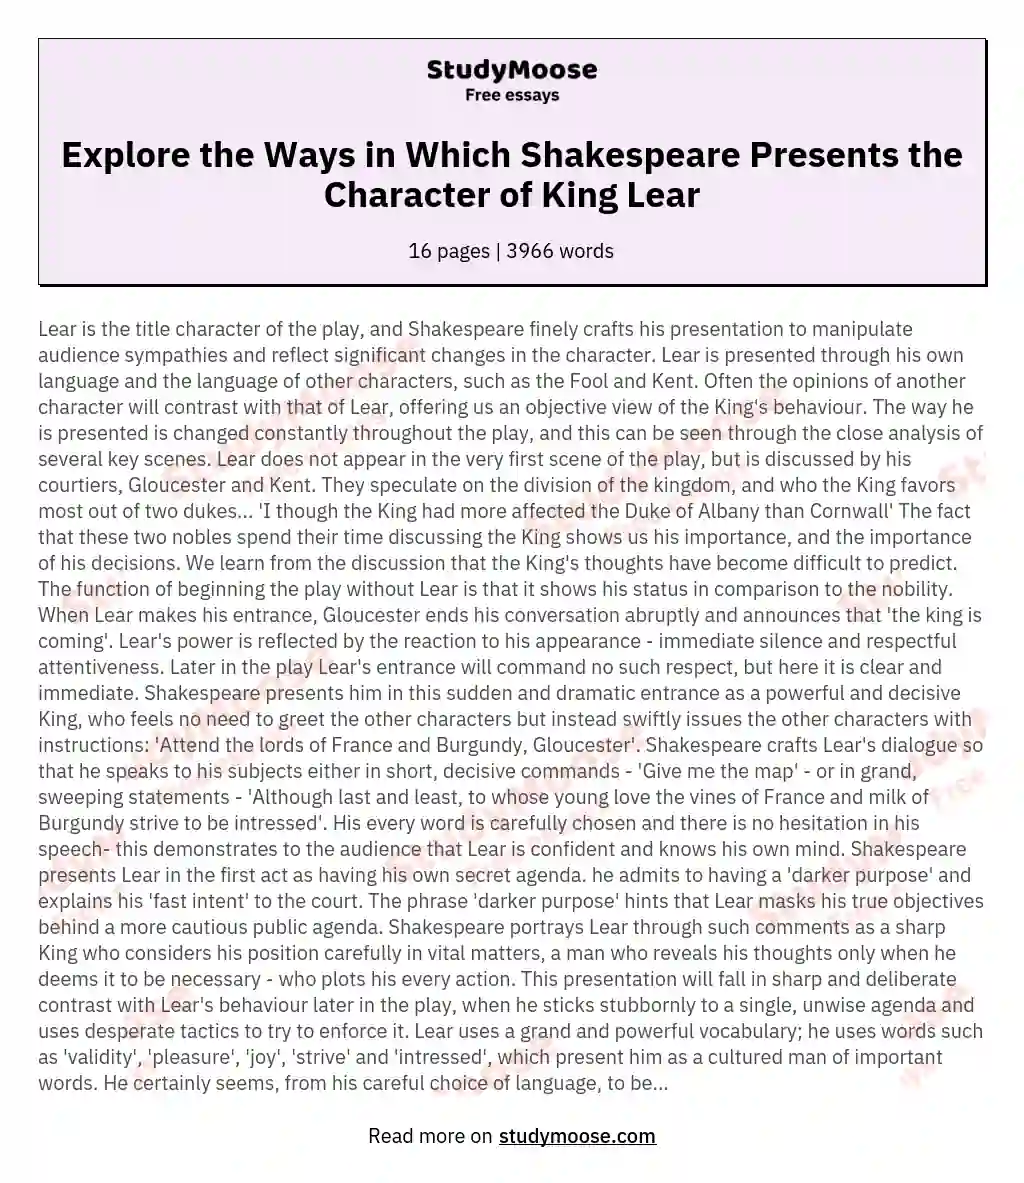 Explore the Ways in Which Shakespeare Presents the Character of King Lear